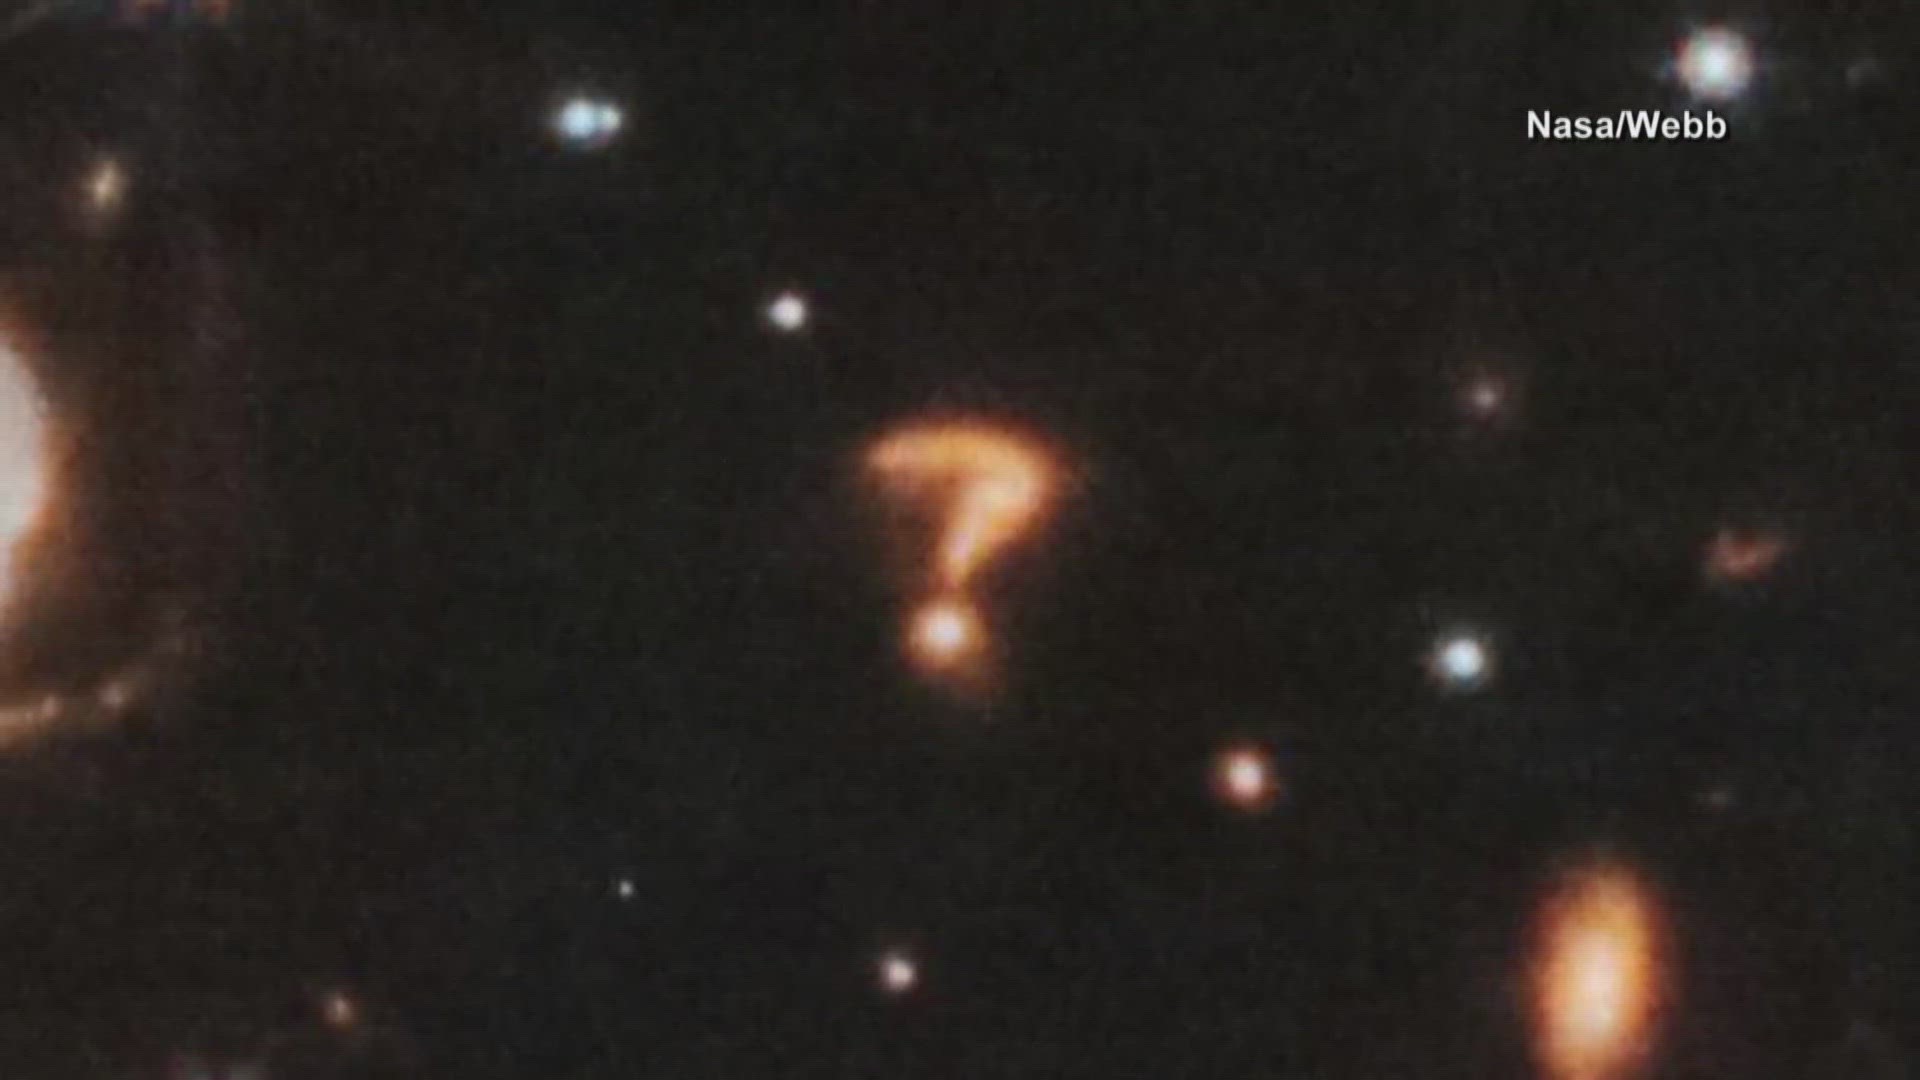 Check out this cosmic phenomenon caught on the James Webb Telescope. It's a blob of light seemingly in the shape of a question mark.